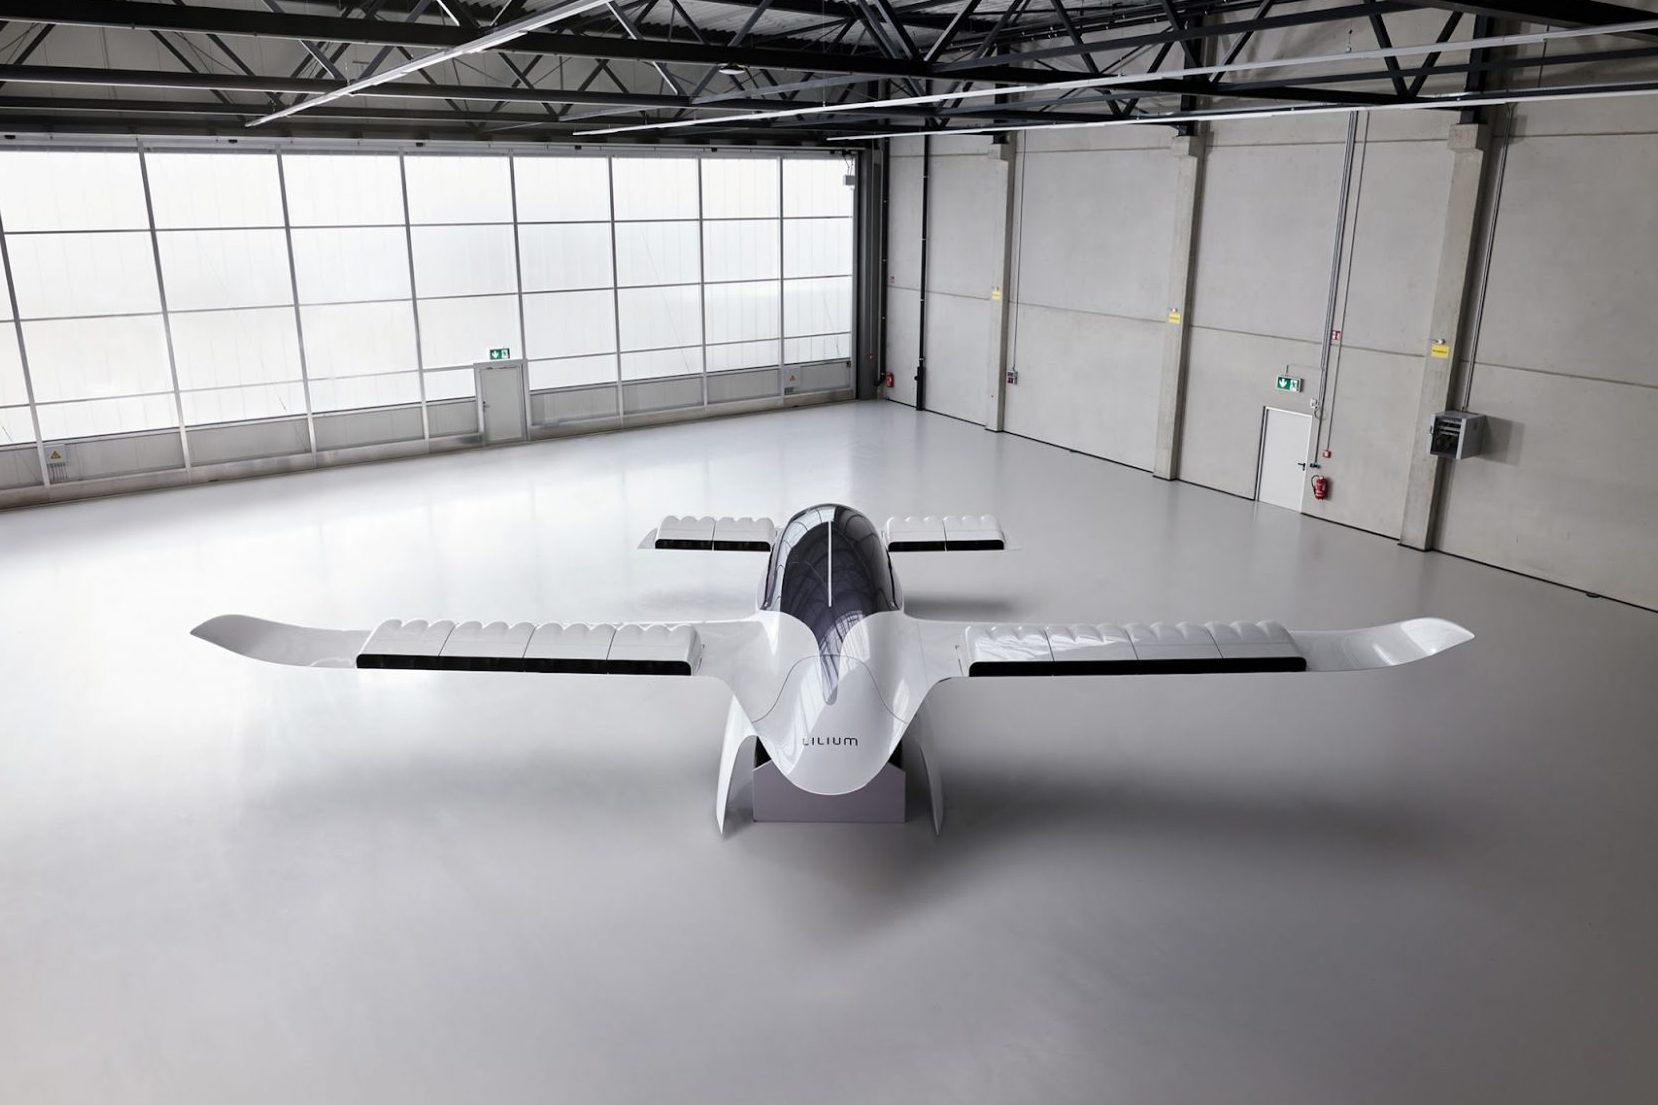 Pictured is a full-scale model of the seven-seater Lilium Jet at the company's headquarters in Munich.